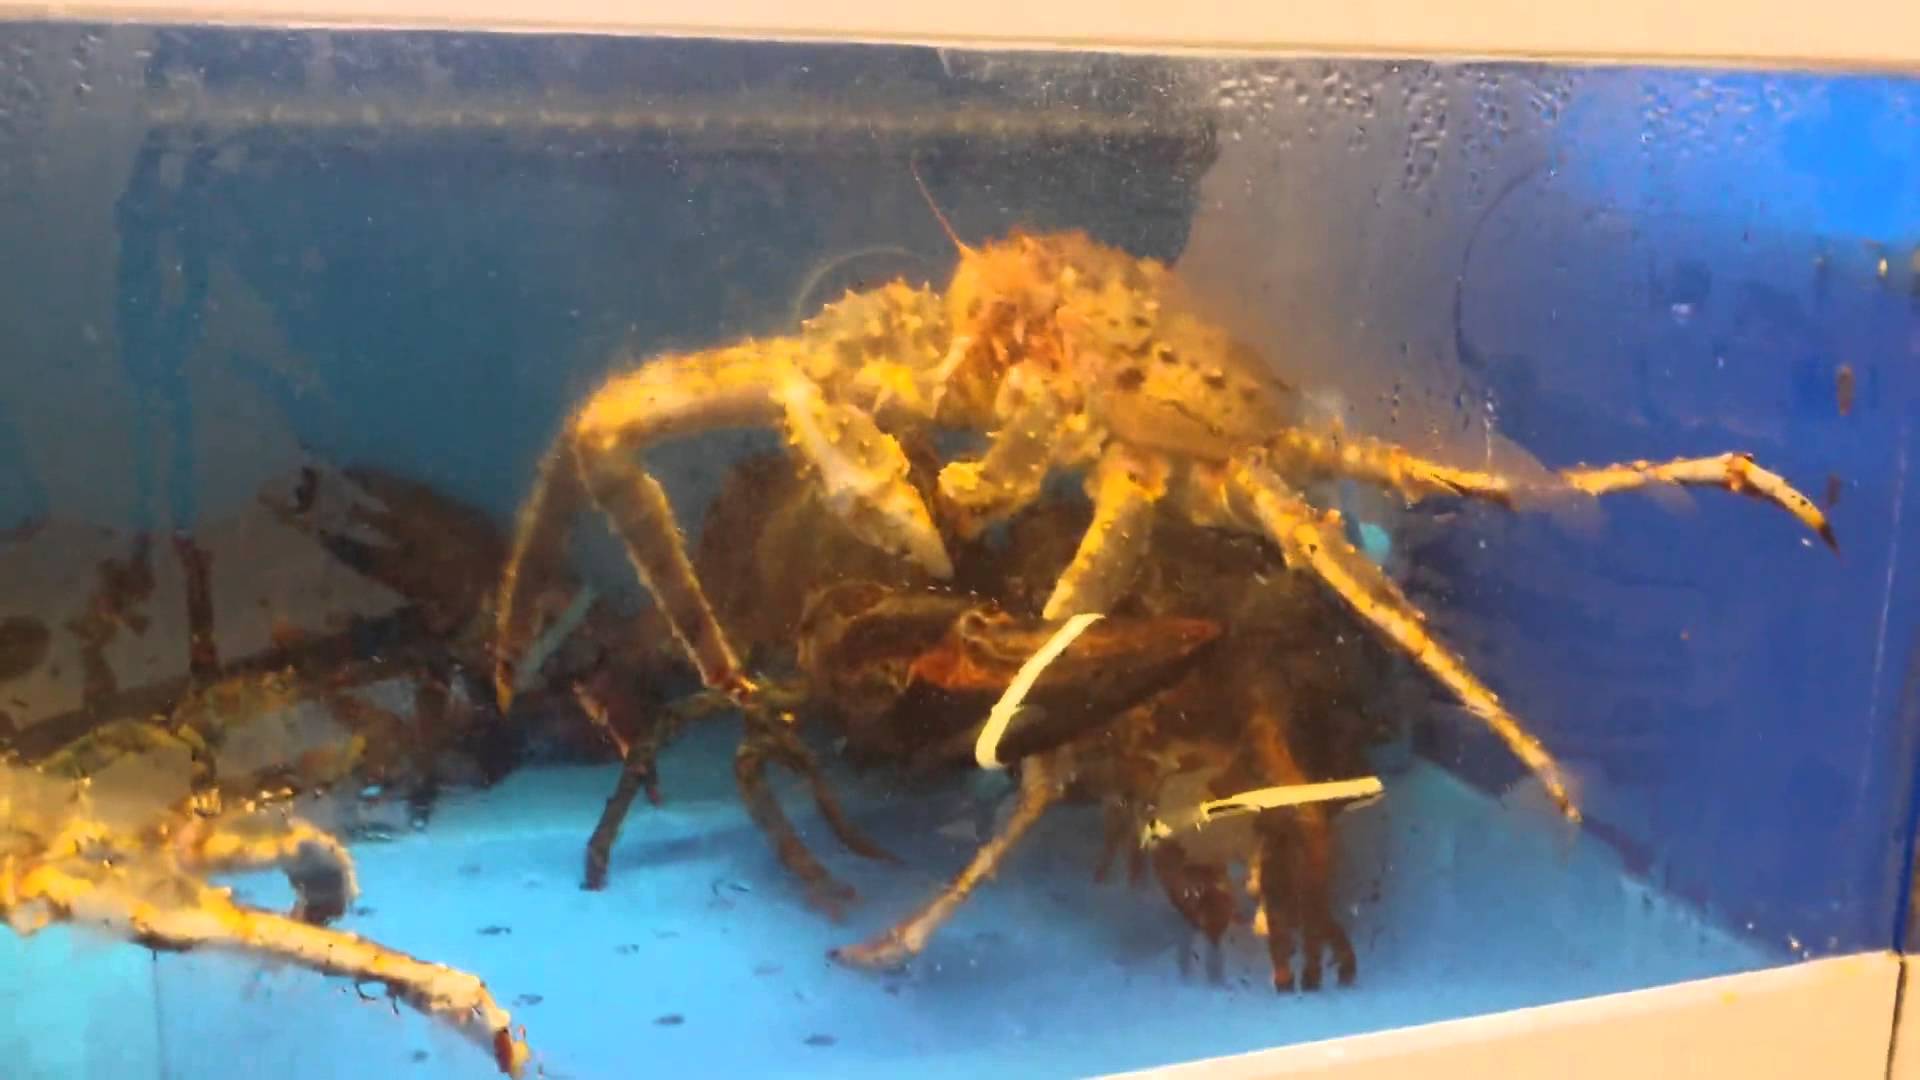 Epic fight between lobster and king crab - YouTube